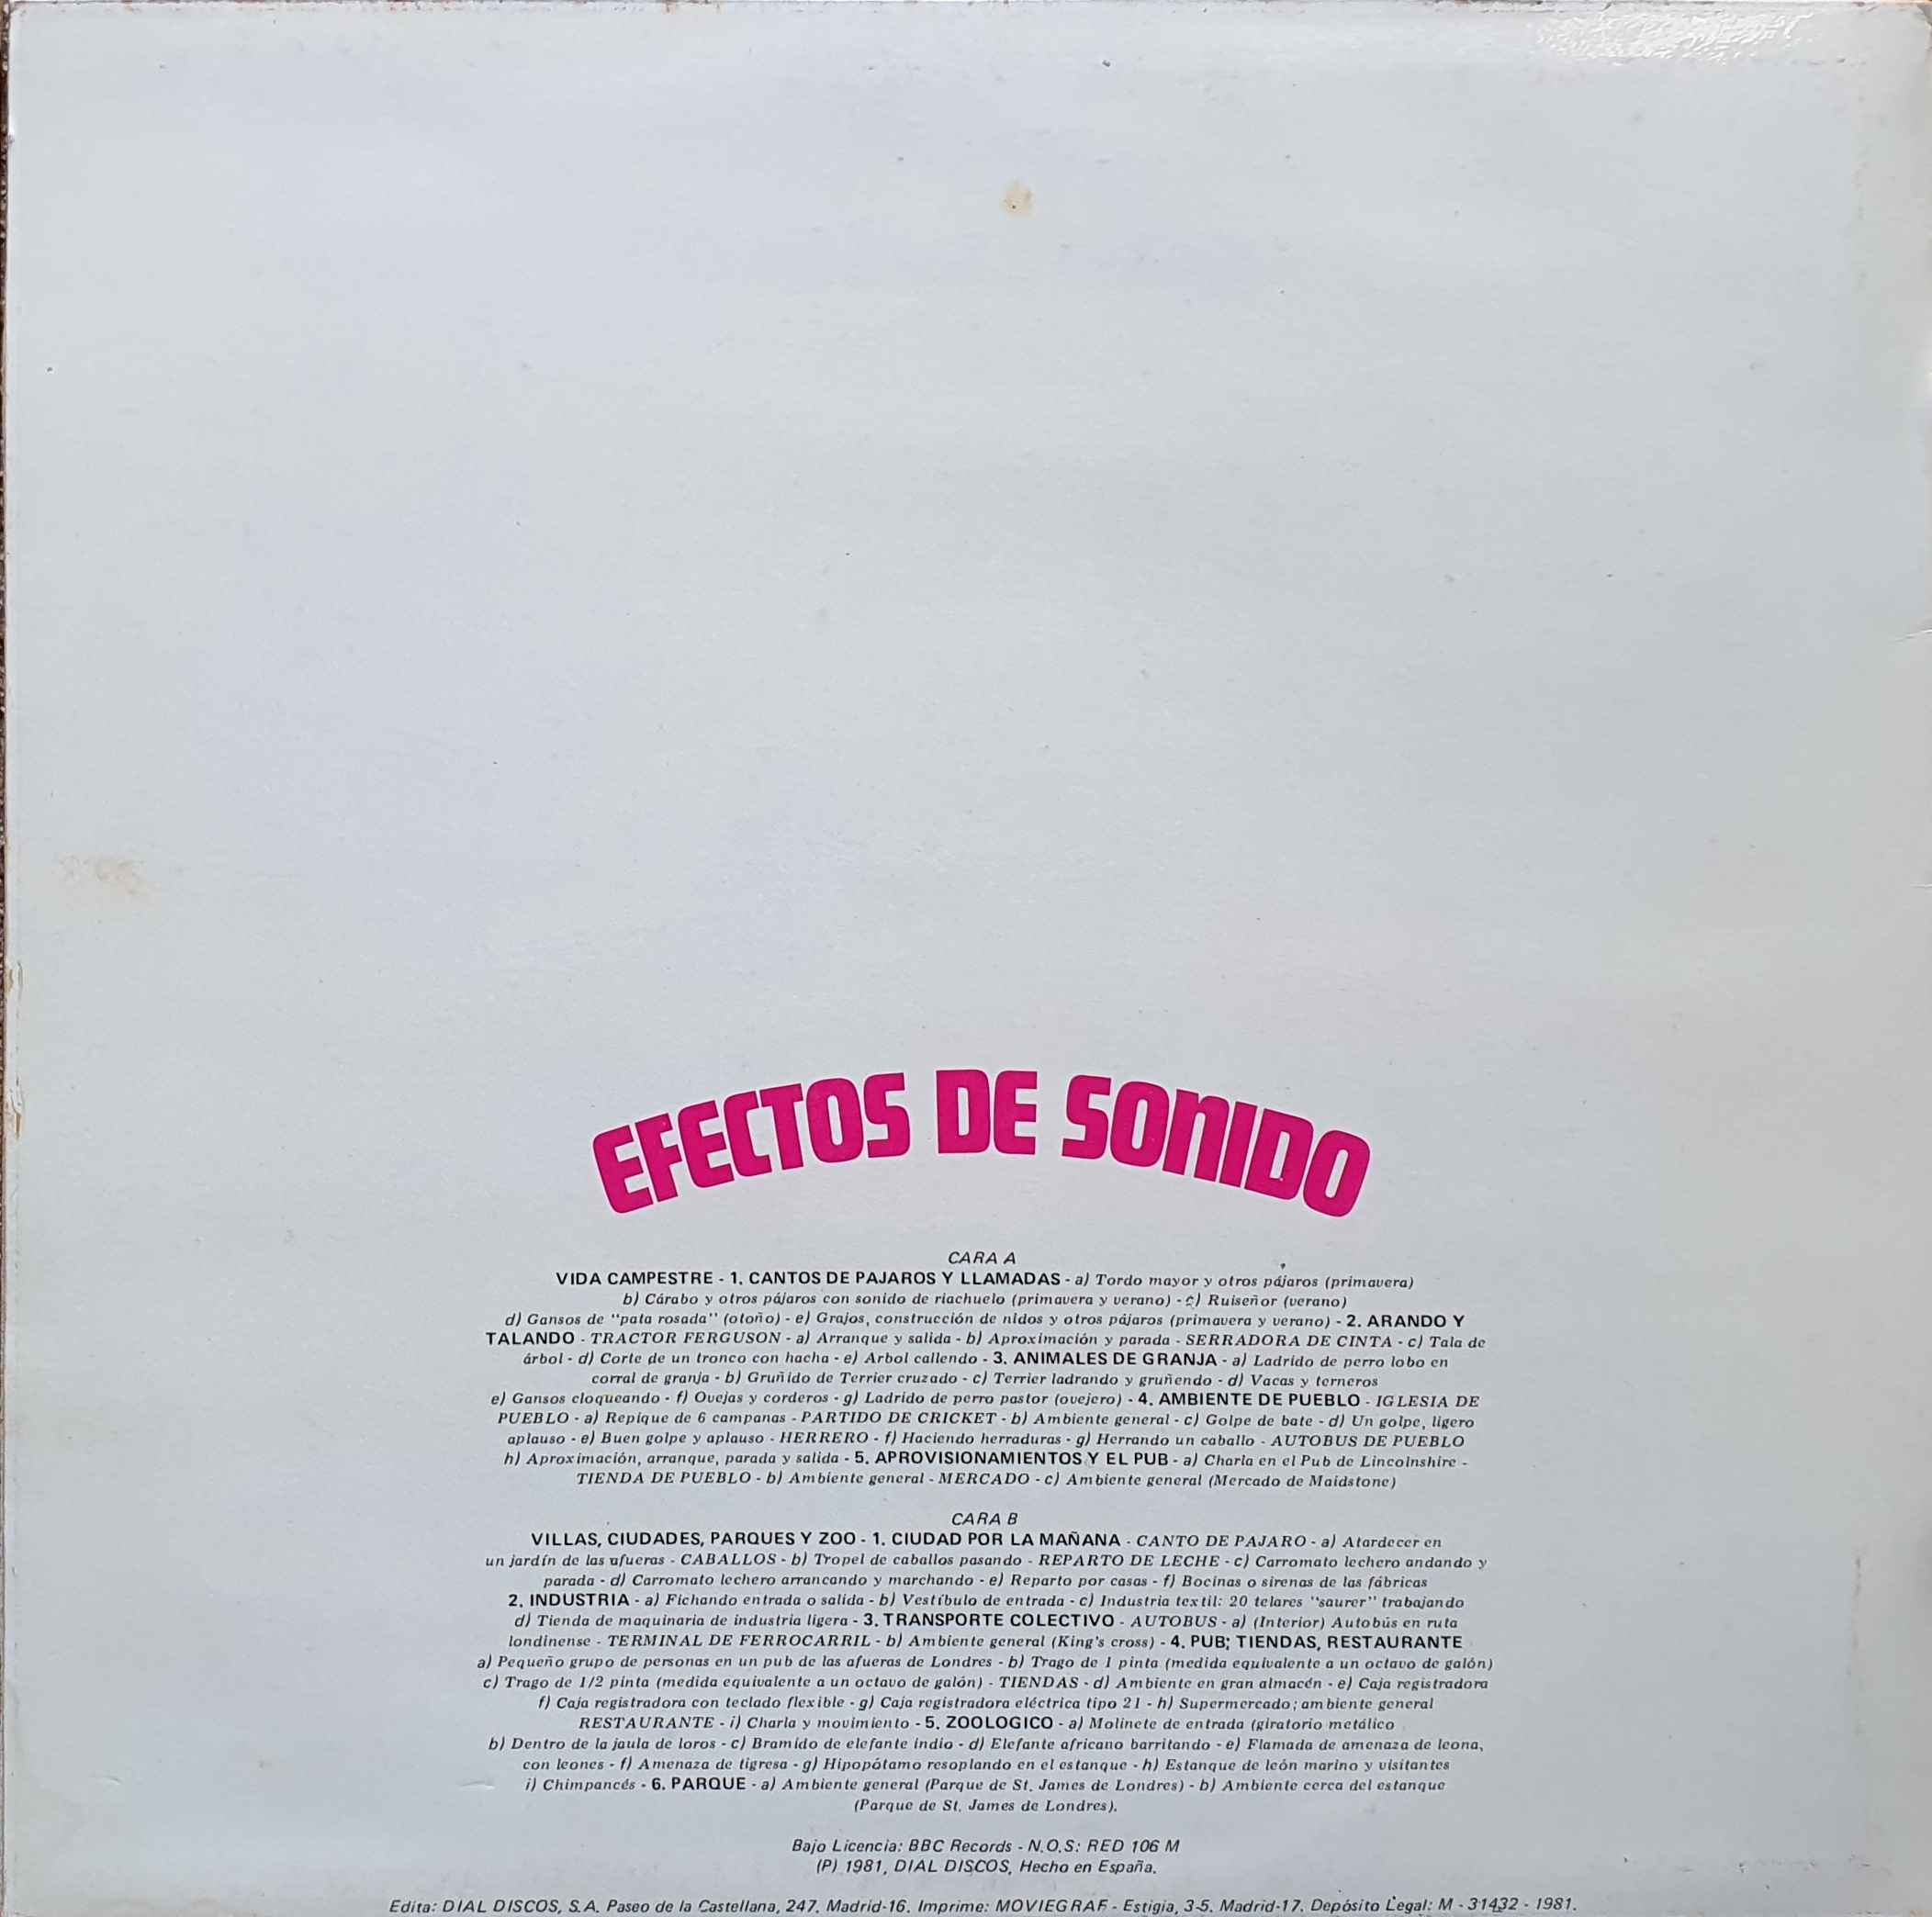 Picture of 51.0110 Efectos de sonido No 6 by artist Various from the BBC records and Tapes library